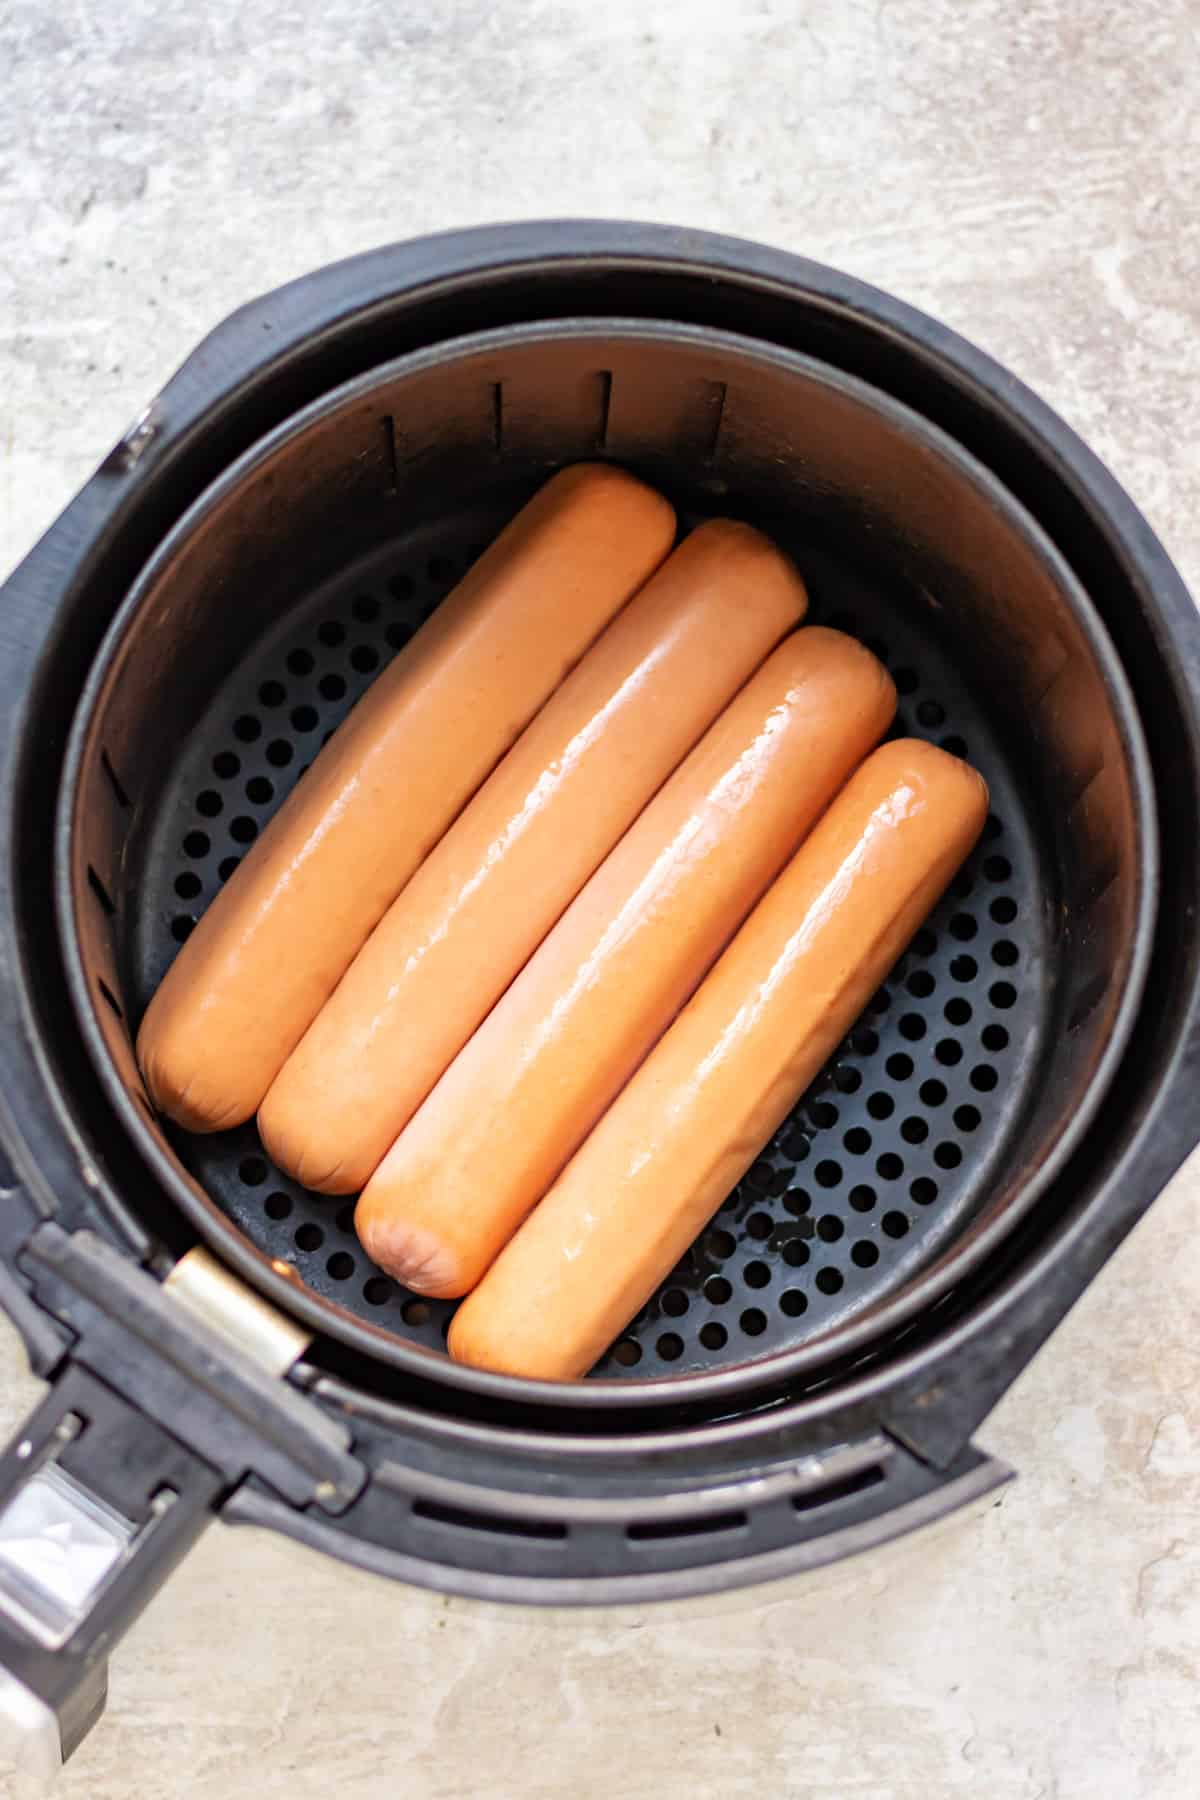 Four hot dogs in an air fryer.